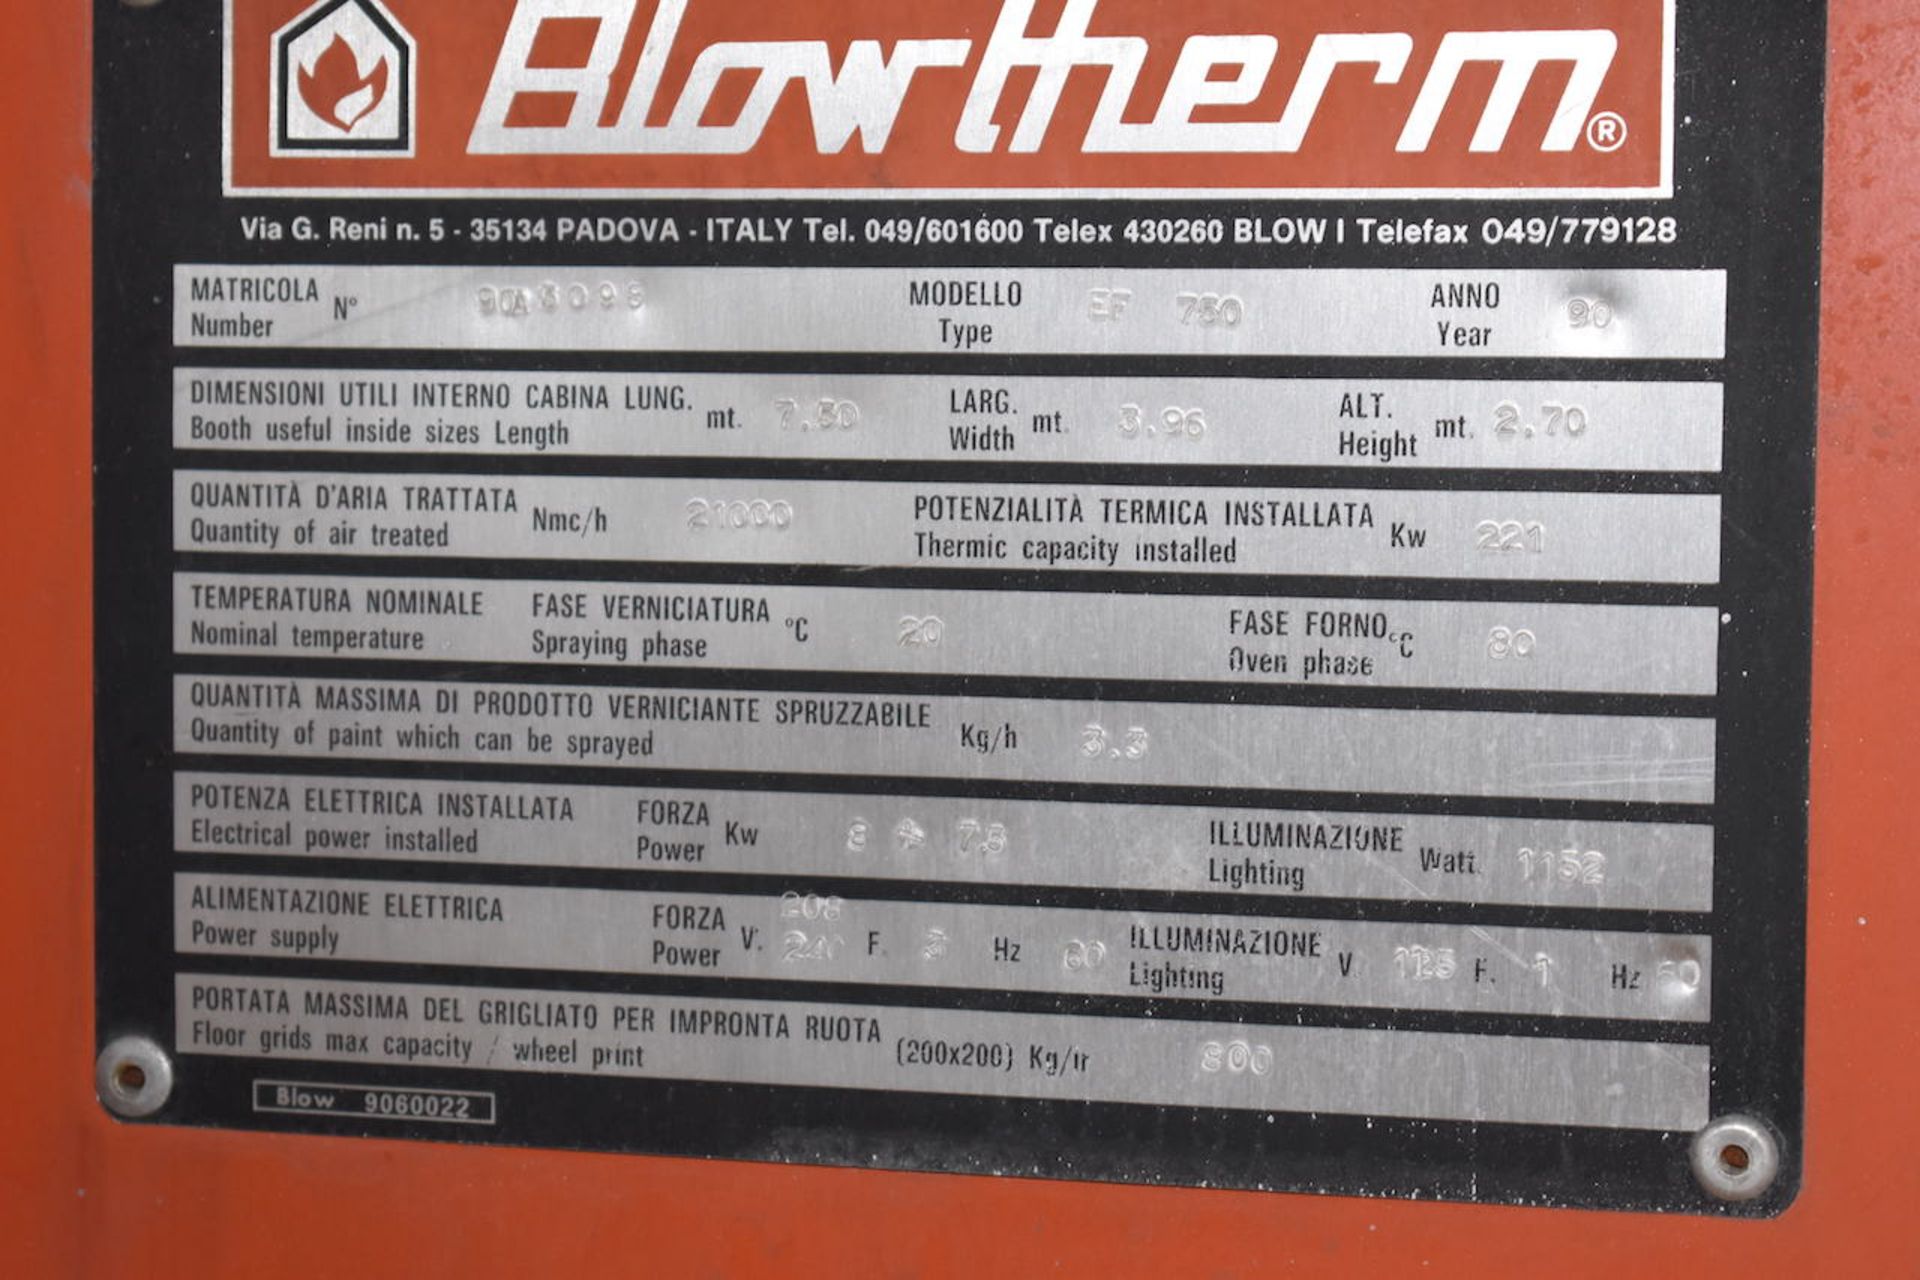 BLOWTHERM MODEL EP-750 DOWNDRAFT HEATED DRIVE-IN SPRAY BOOTH: - Image 5 of 7